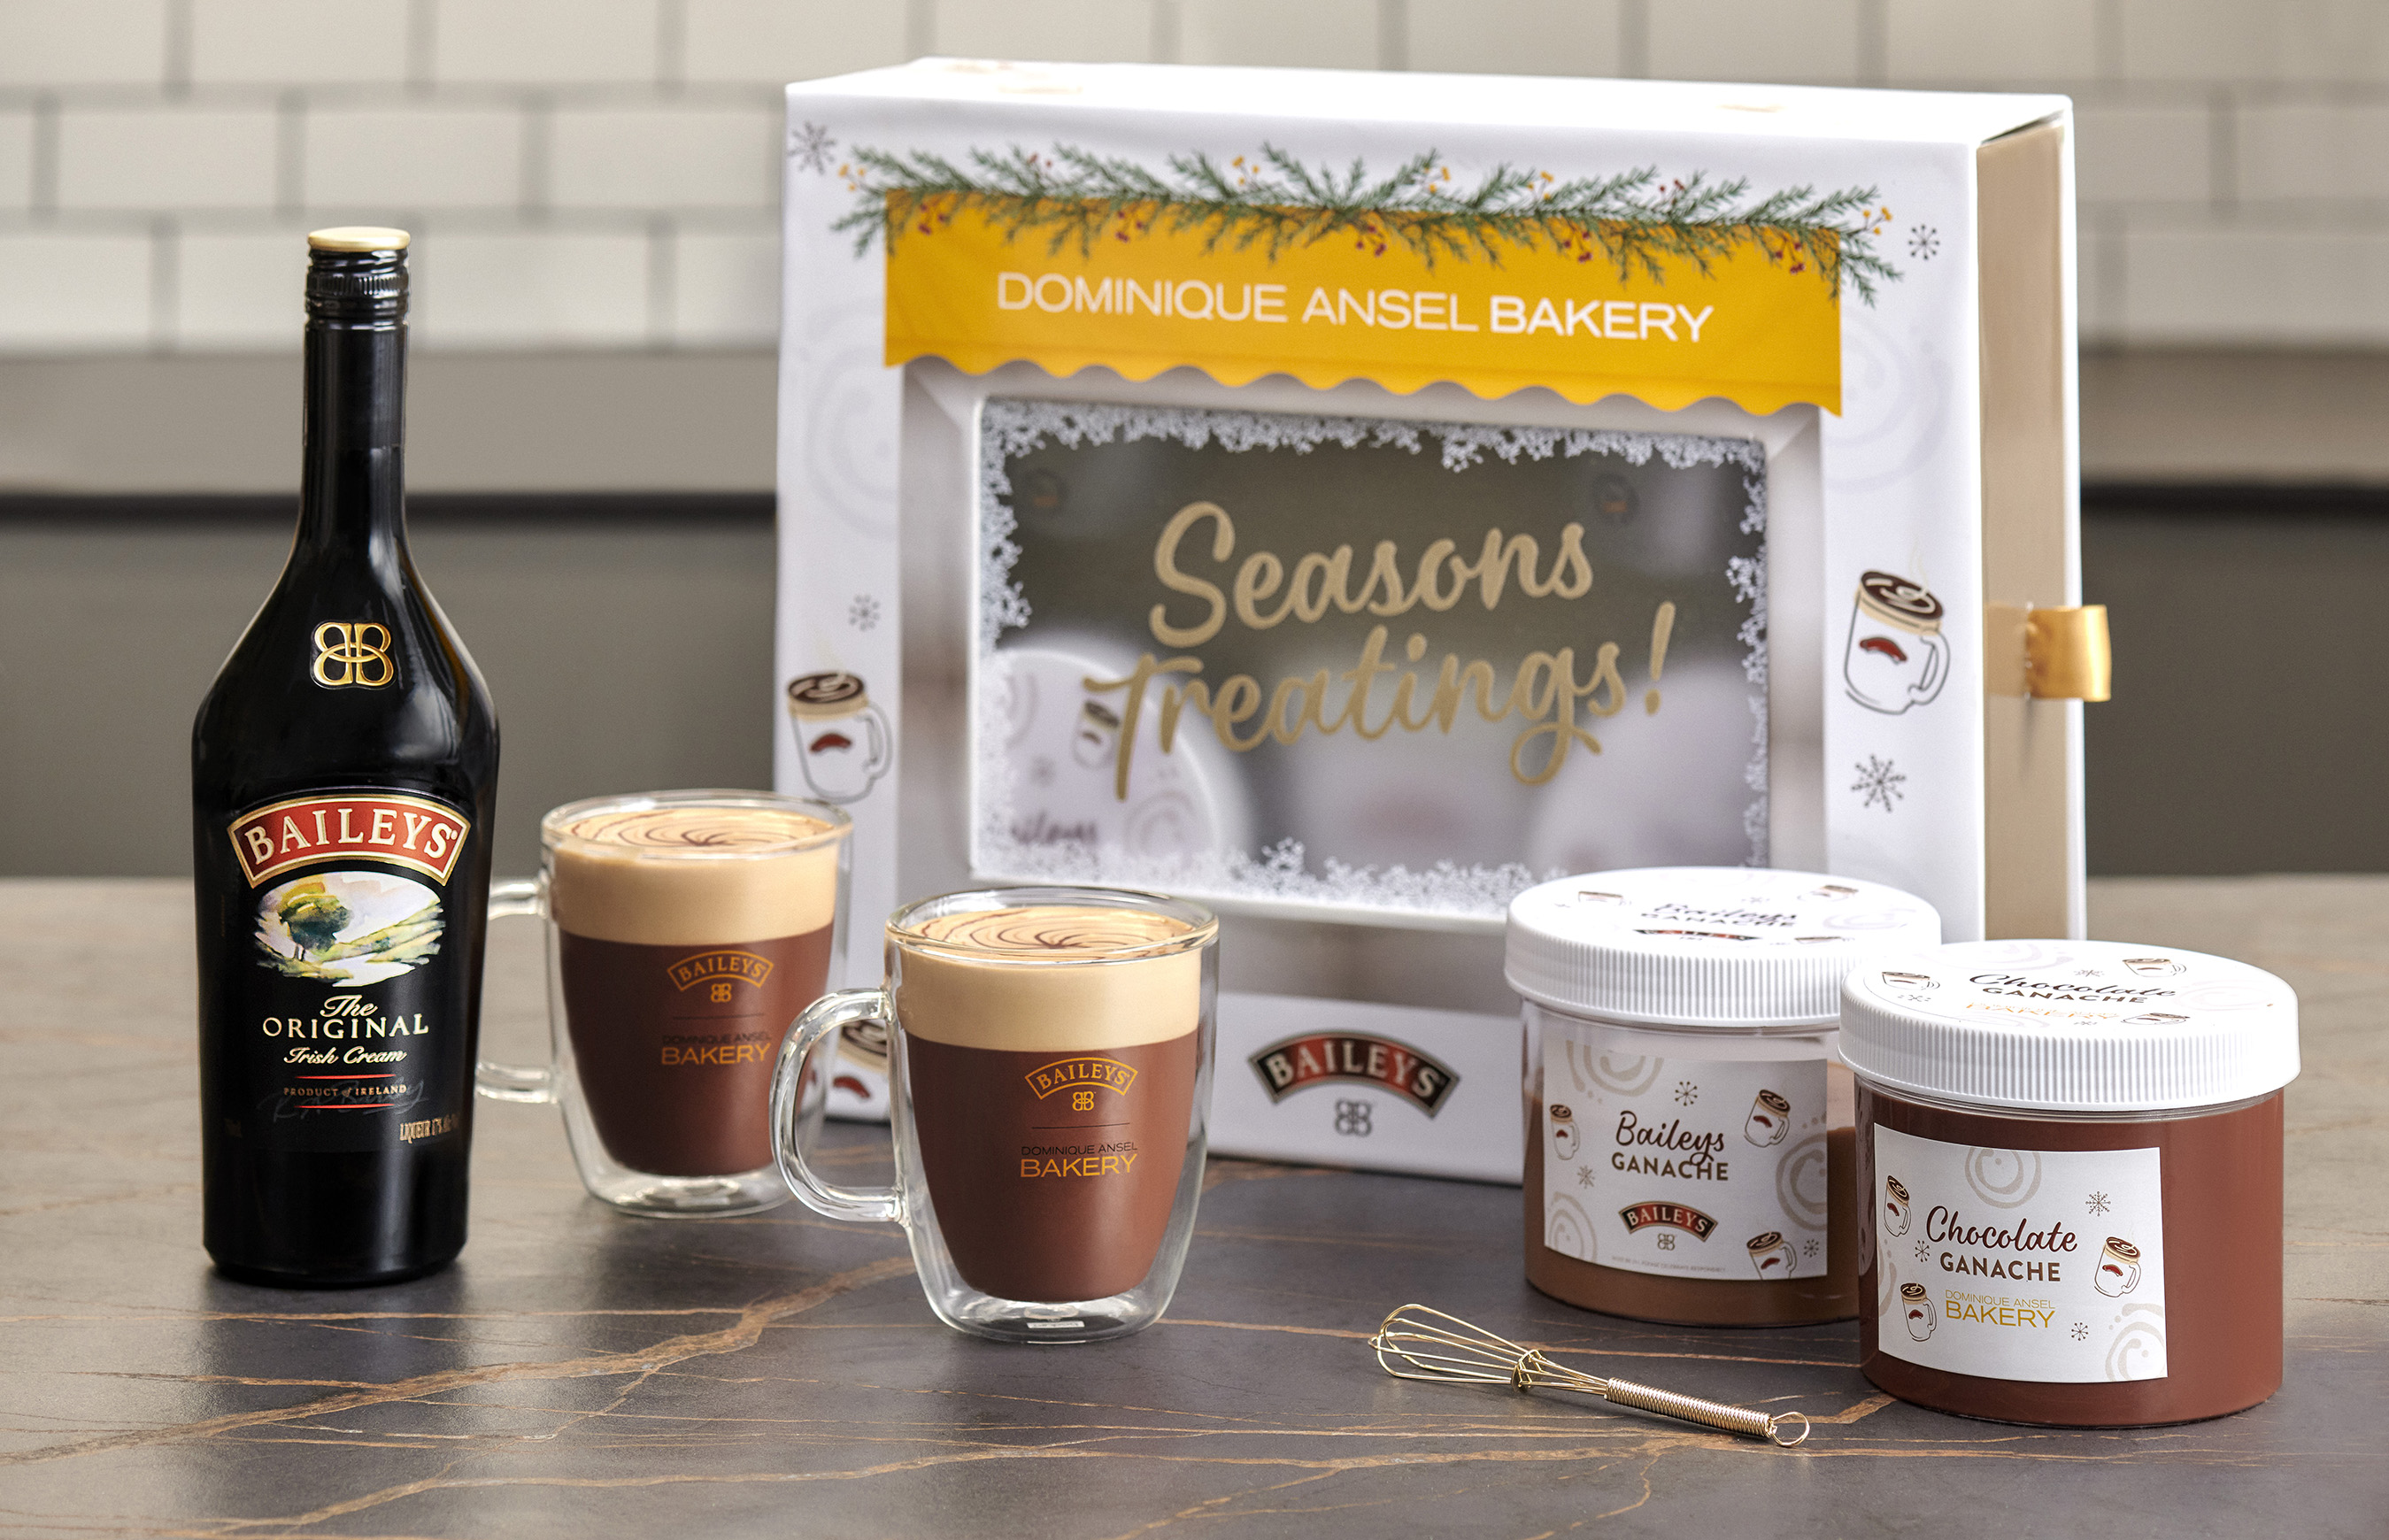 Introducing the Baileys Swirl Holiday Hot Chocolate Kit created by pastry chef Dominique Ansel, available exclusively this Holiday season!